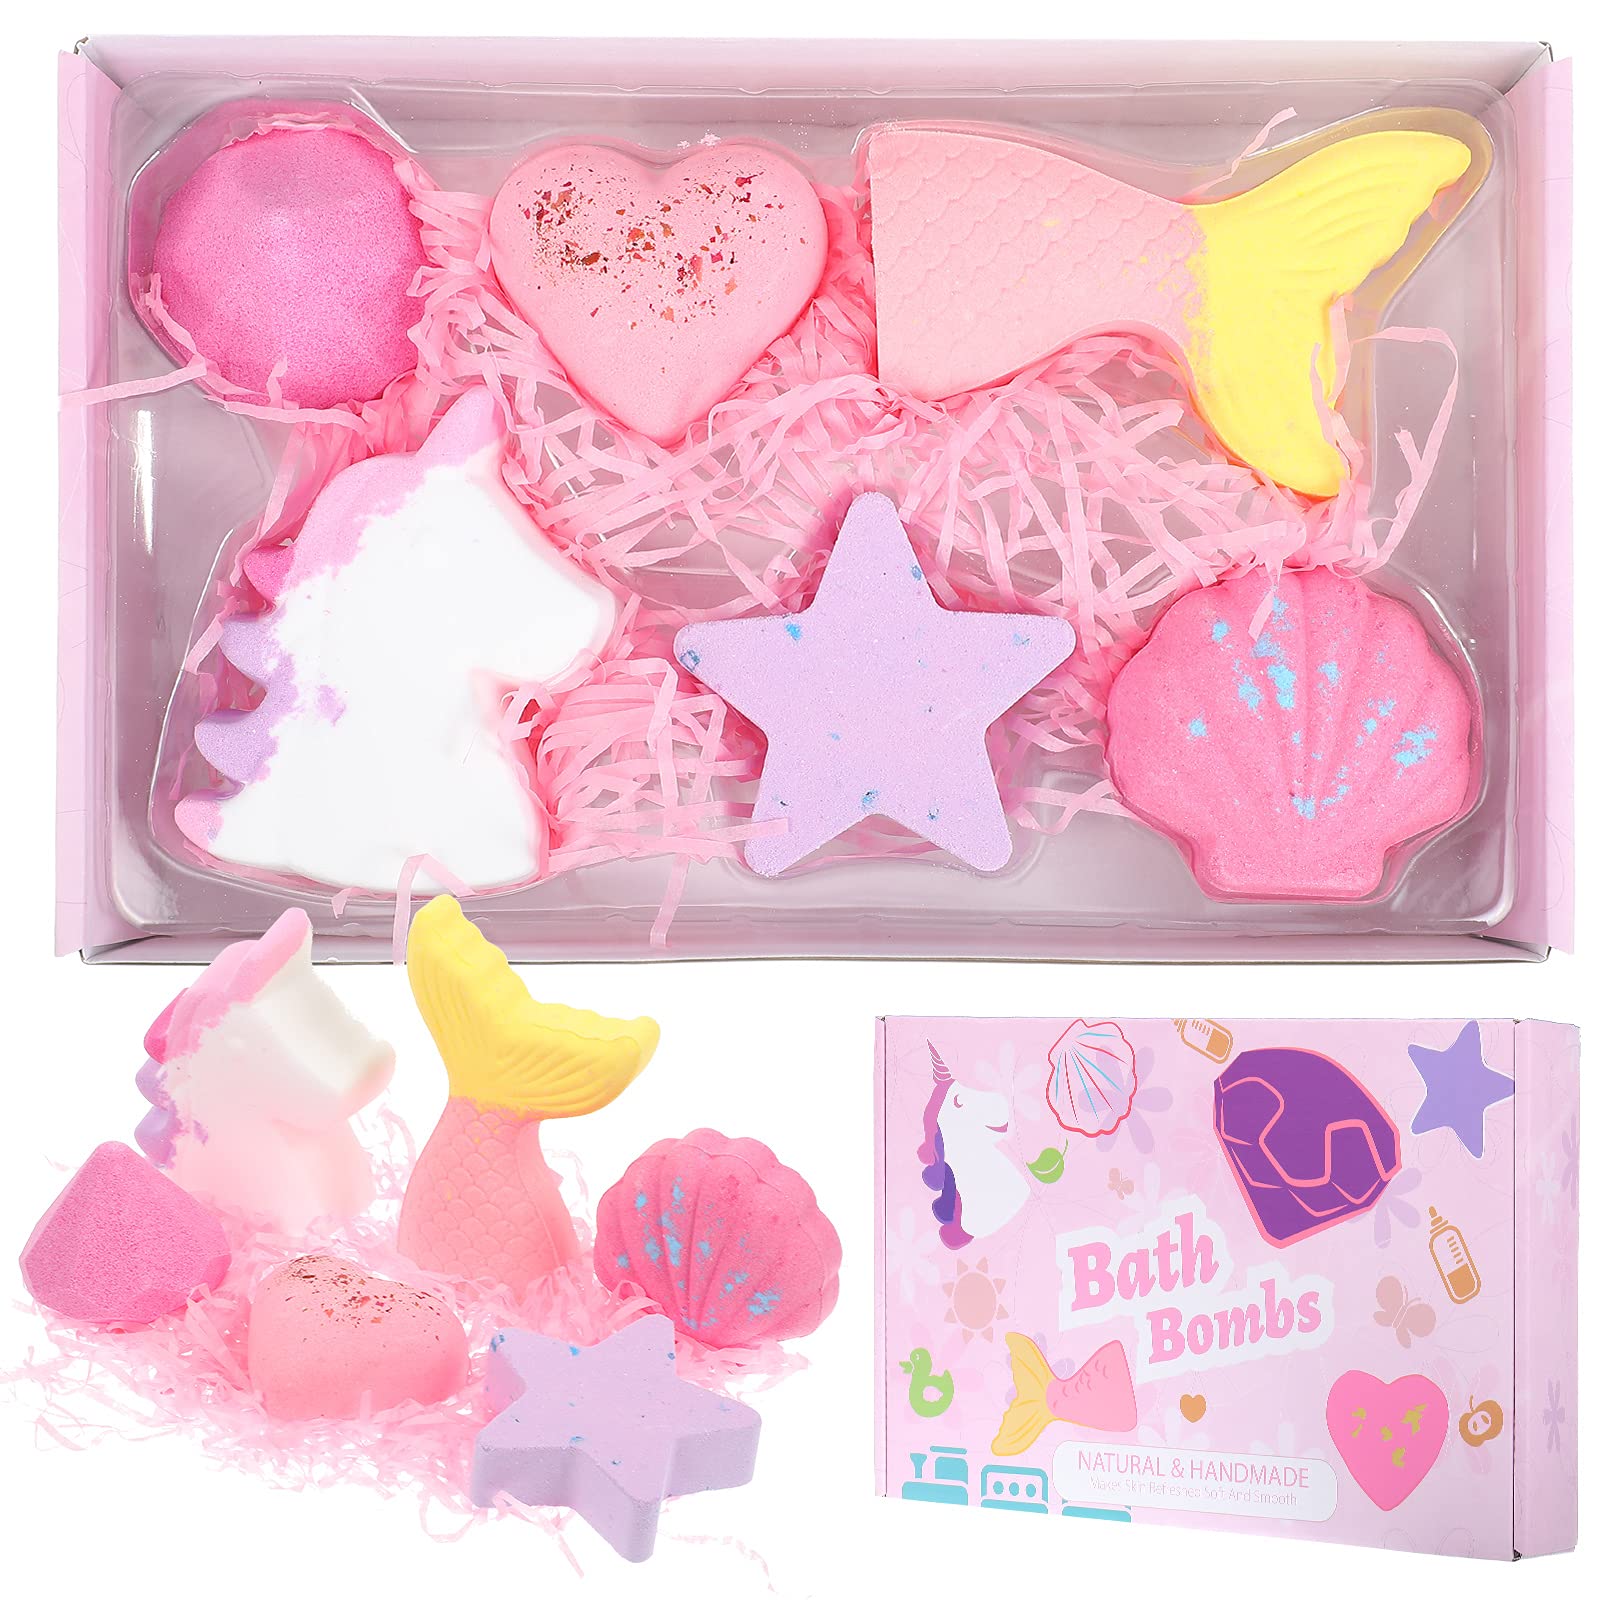 Lovely Girl's Shower Product Bath Bomb Kit - China Bath Bombs and